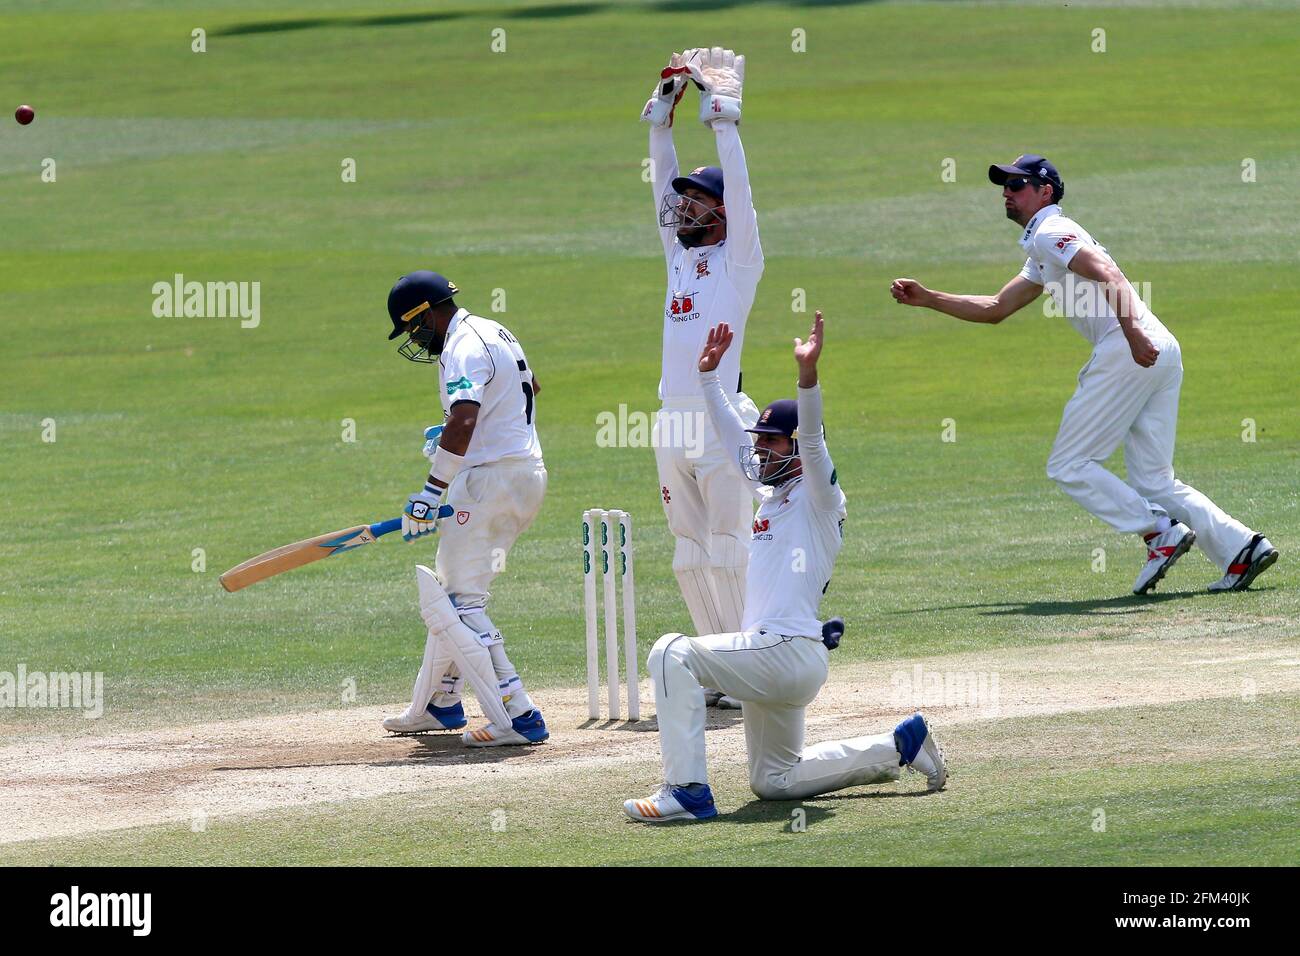 Essex players appeal successfully for the wicket of Jeetan Patel during Essex CCC vs Warwickshire CCC, Specsavers County Championship Division 1 Crick Stock Photo